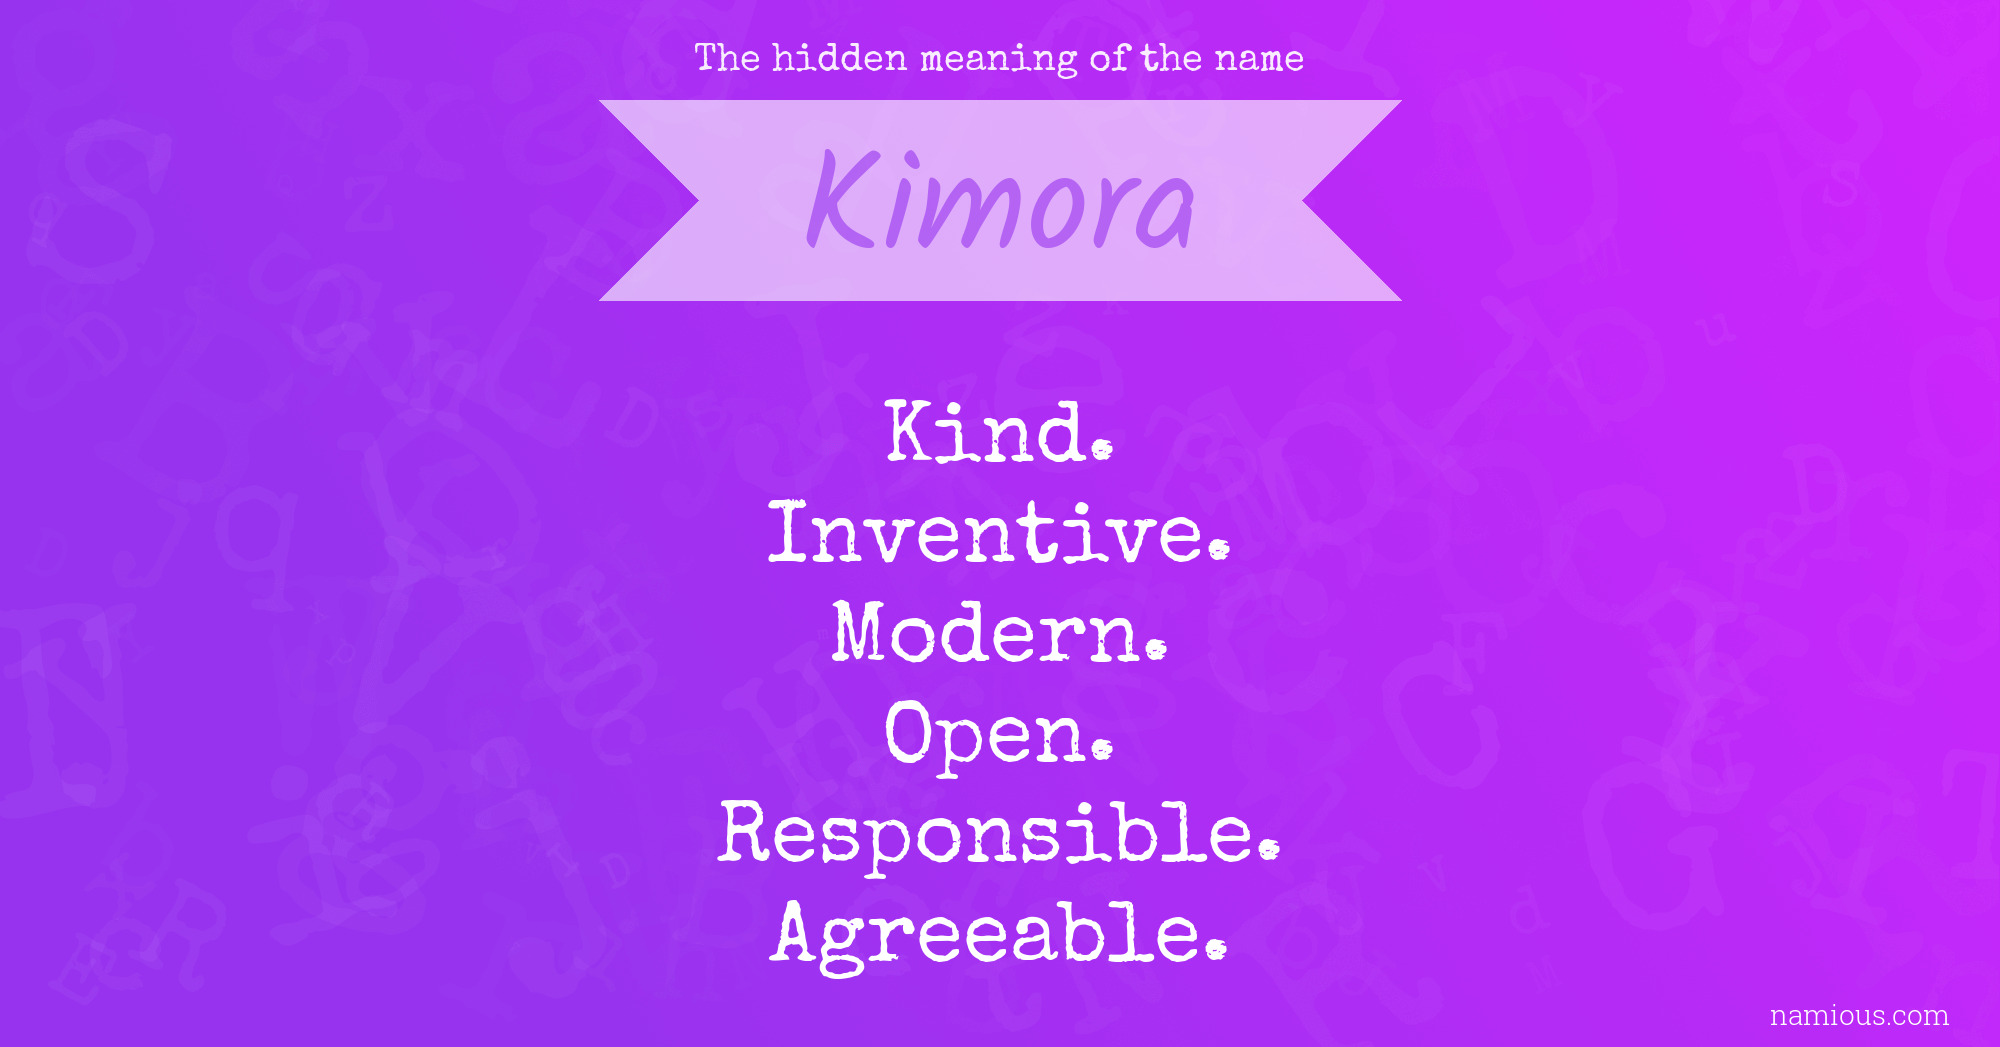 The hidden meaning of the name Kimora